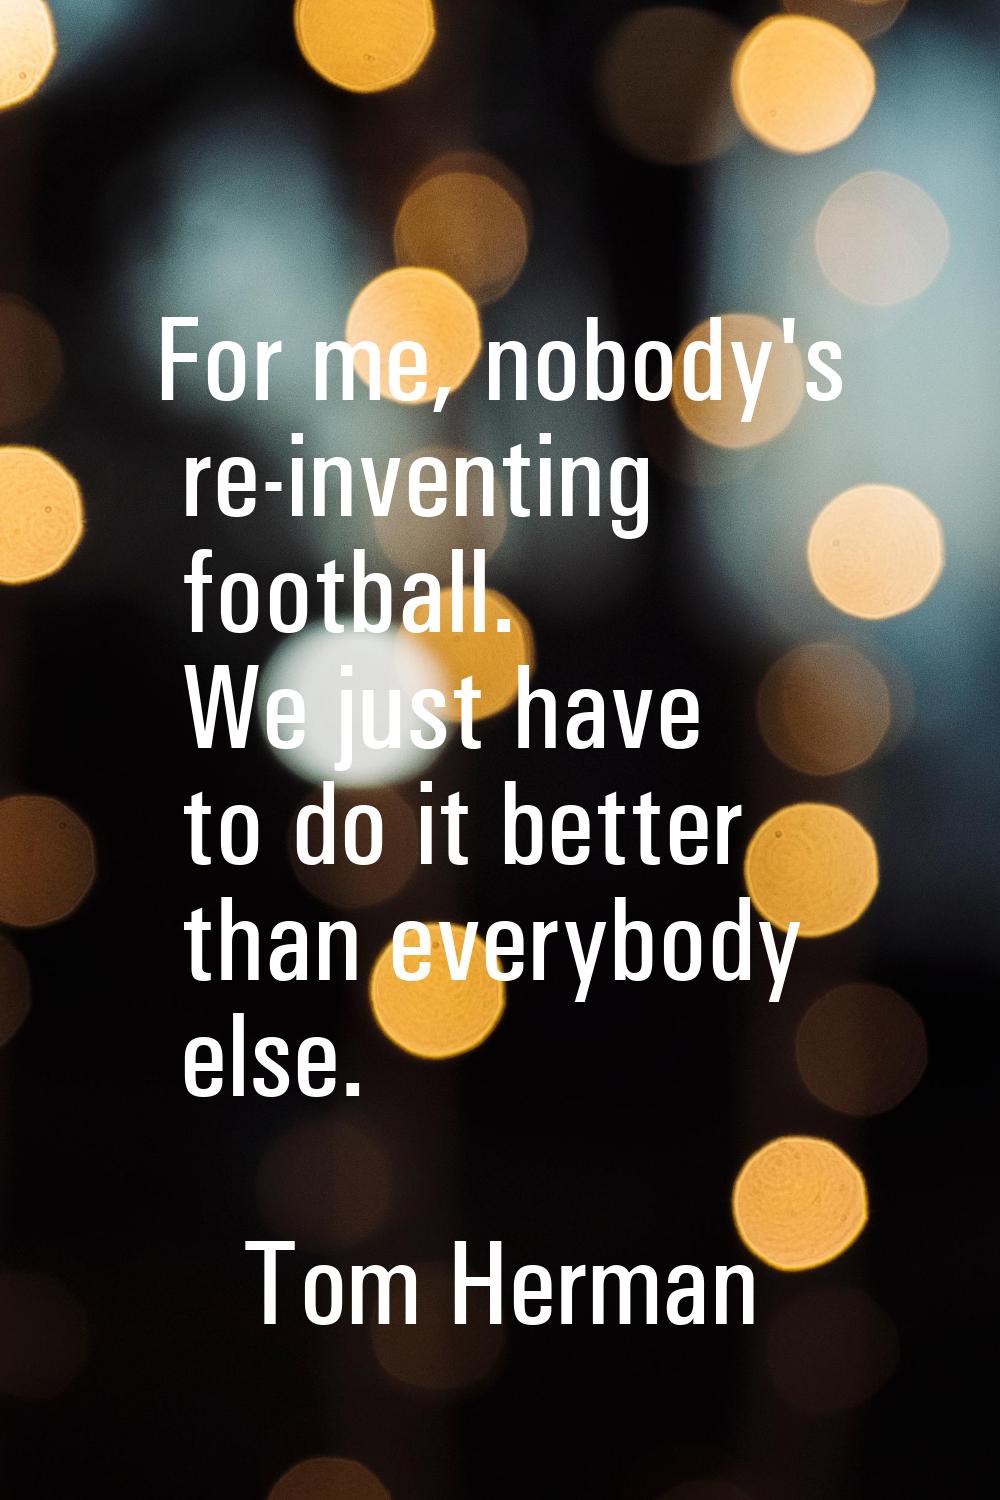 For me, nobody's re-inventing football. We just have to do it better than everybody else.